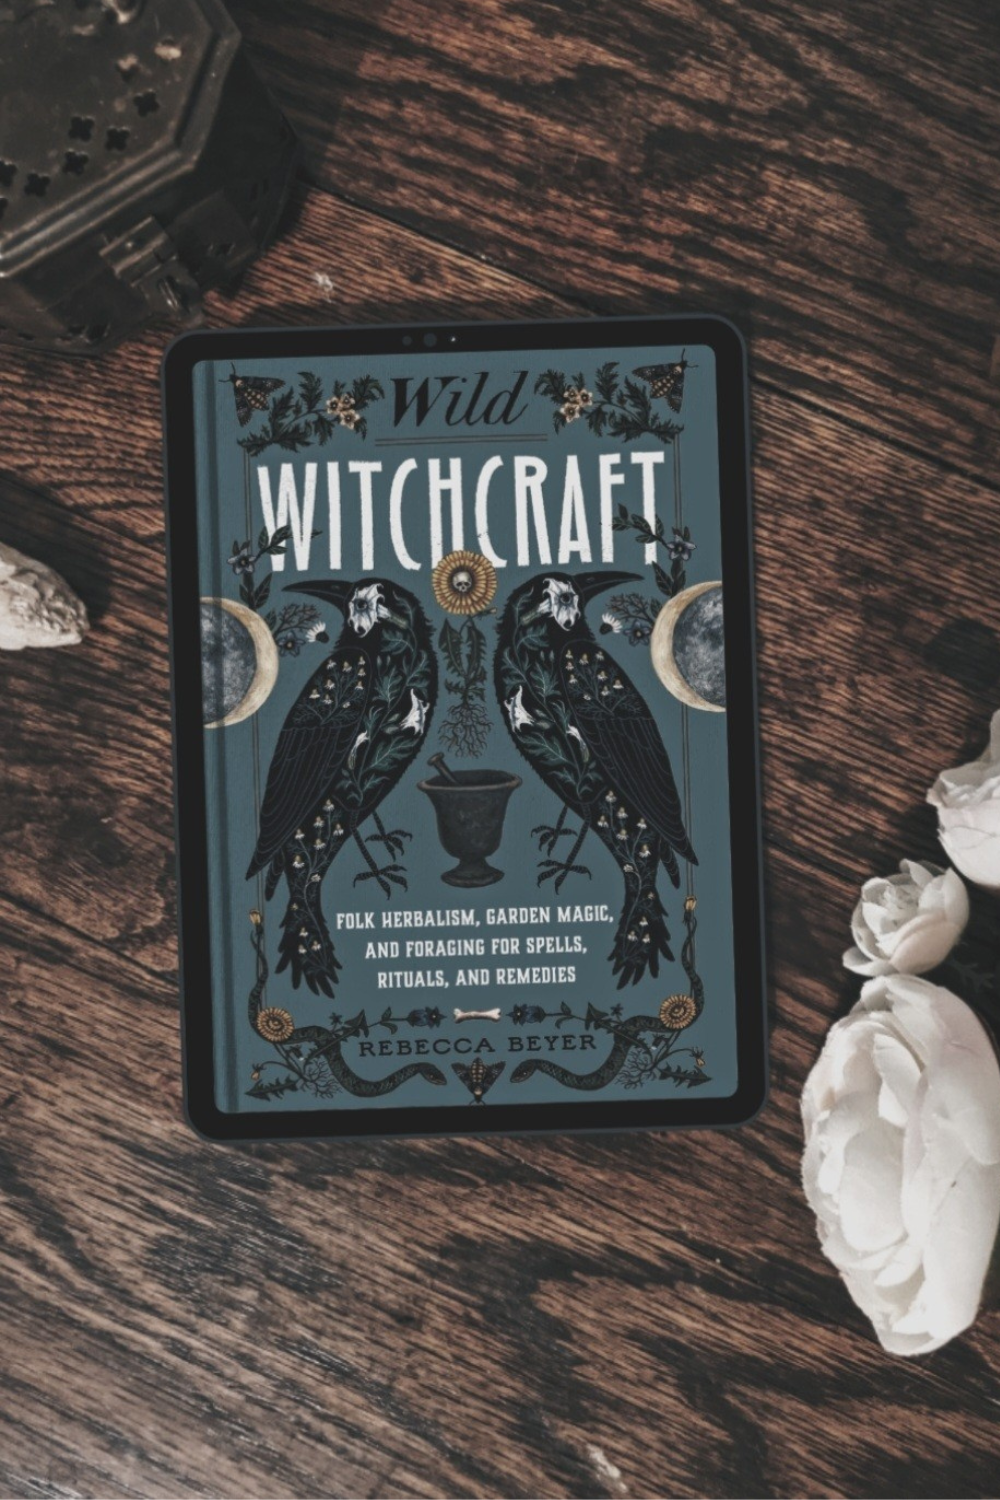 witchcraft, green witch, green witchcraft, hedge witch, hedgewitch, kitchen witch, wild crafting, foraging, herb, herb magic, plant magic, wicca, wiccan, pagan